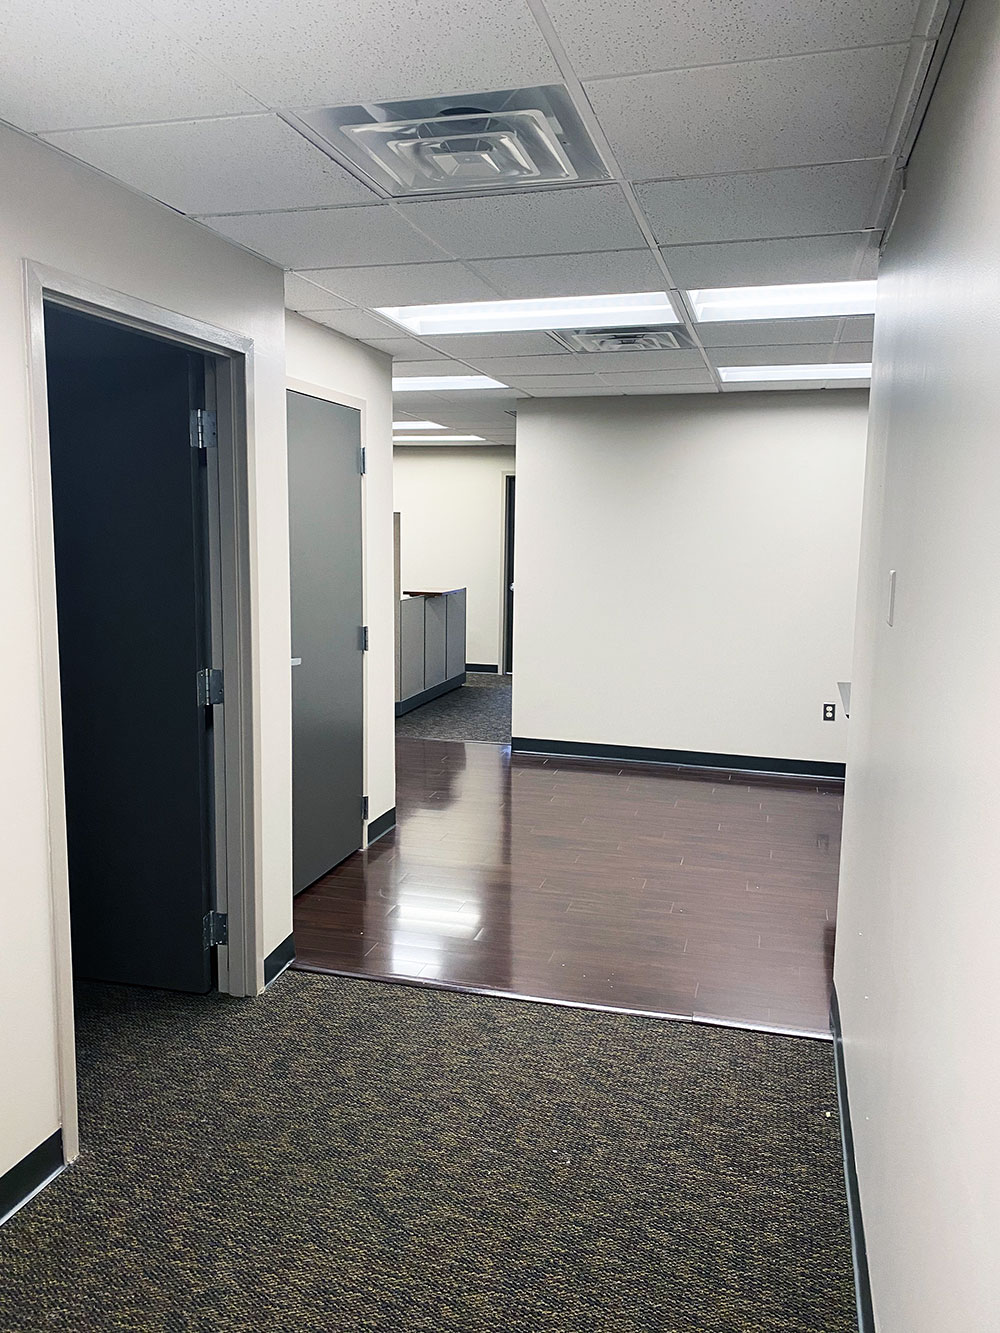 Emerald Realty Group: Suite 304 at 60 W. Broad Street, Class A Office Space available for immediate occupancy in Bethlehem, PA.